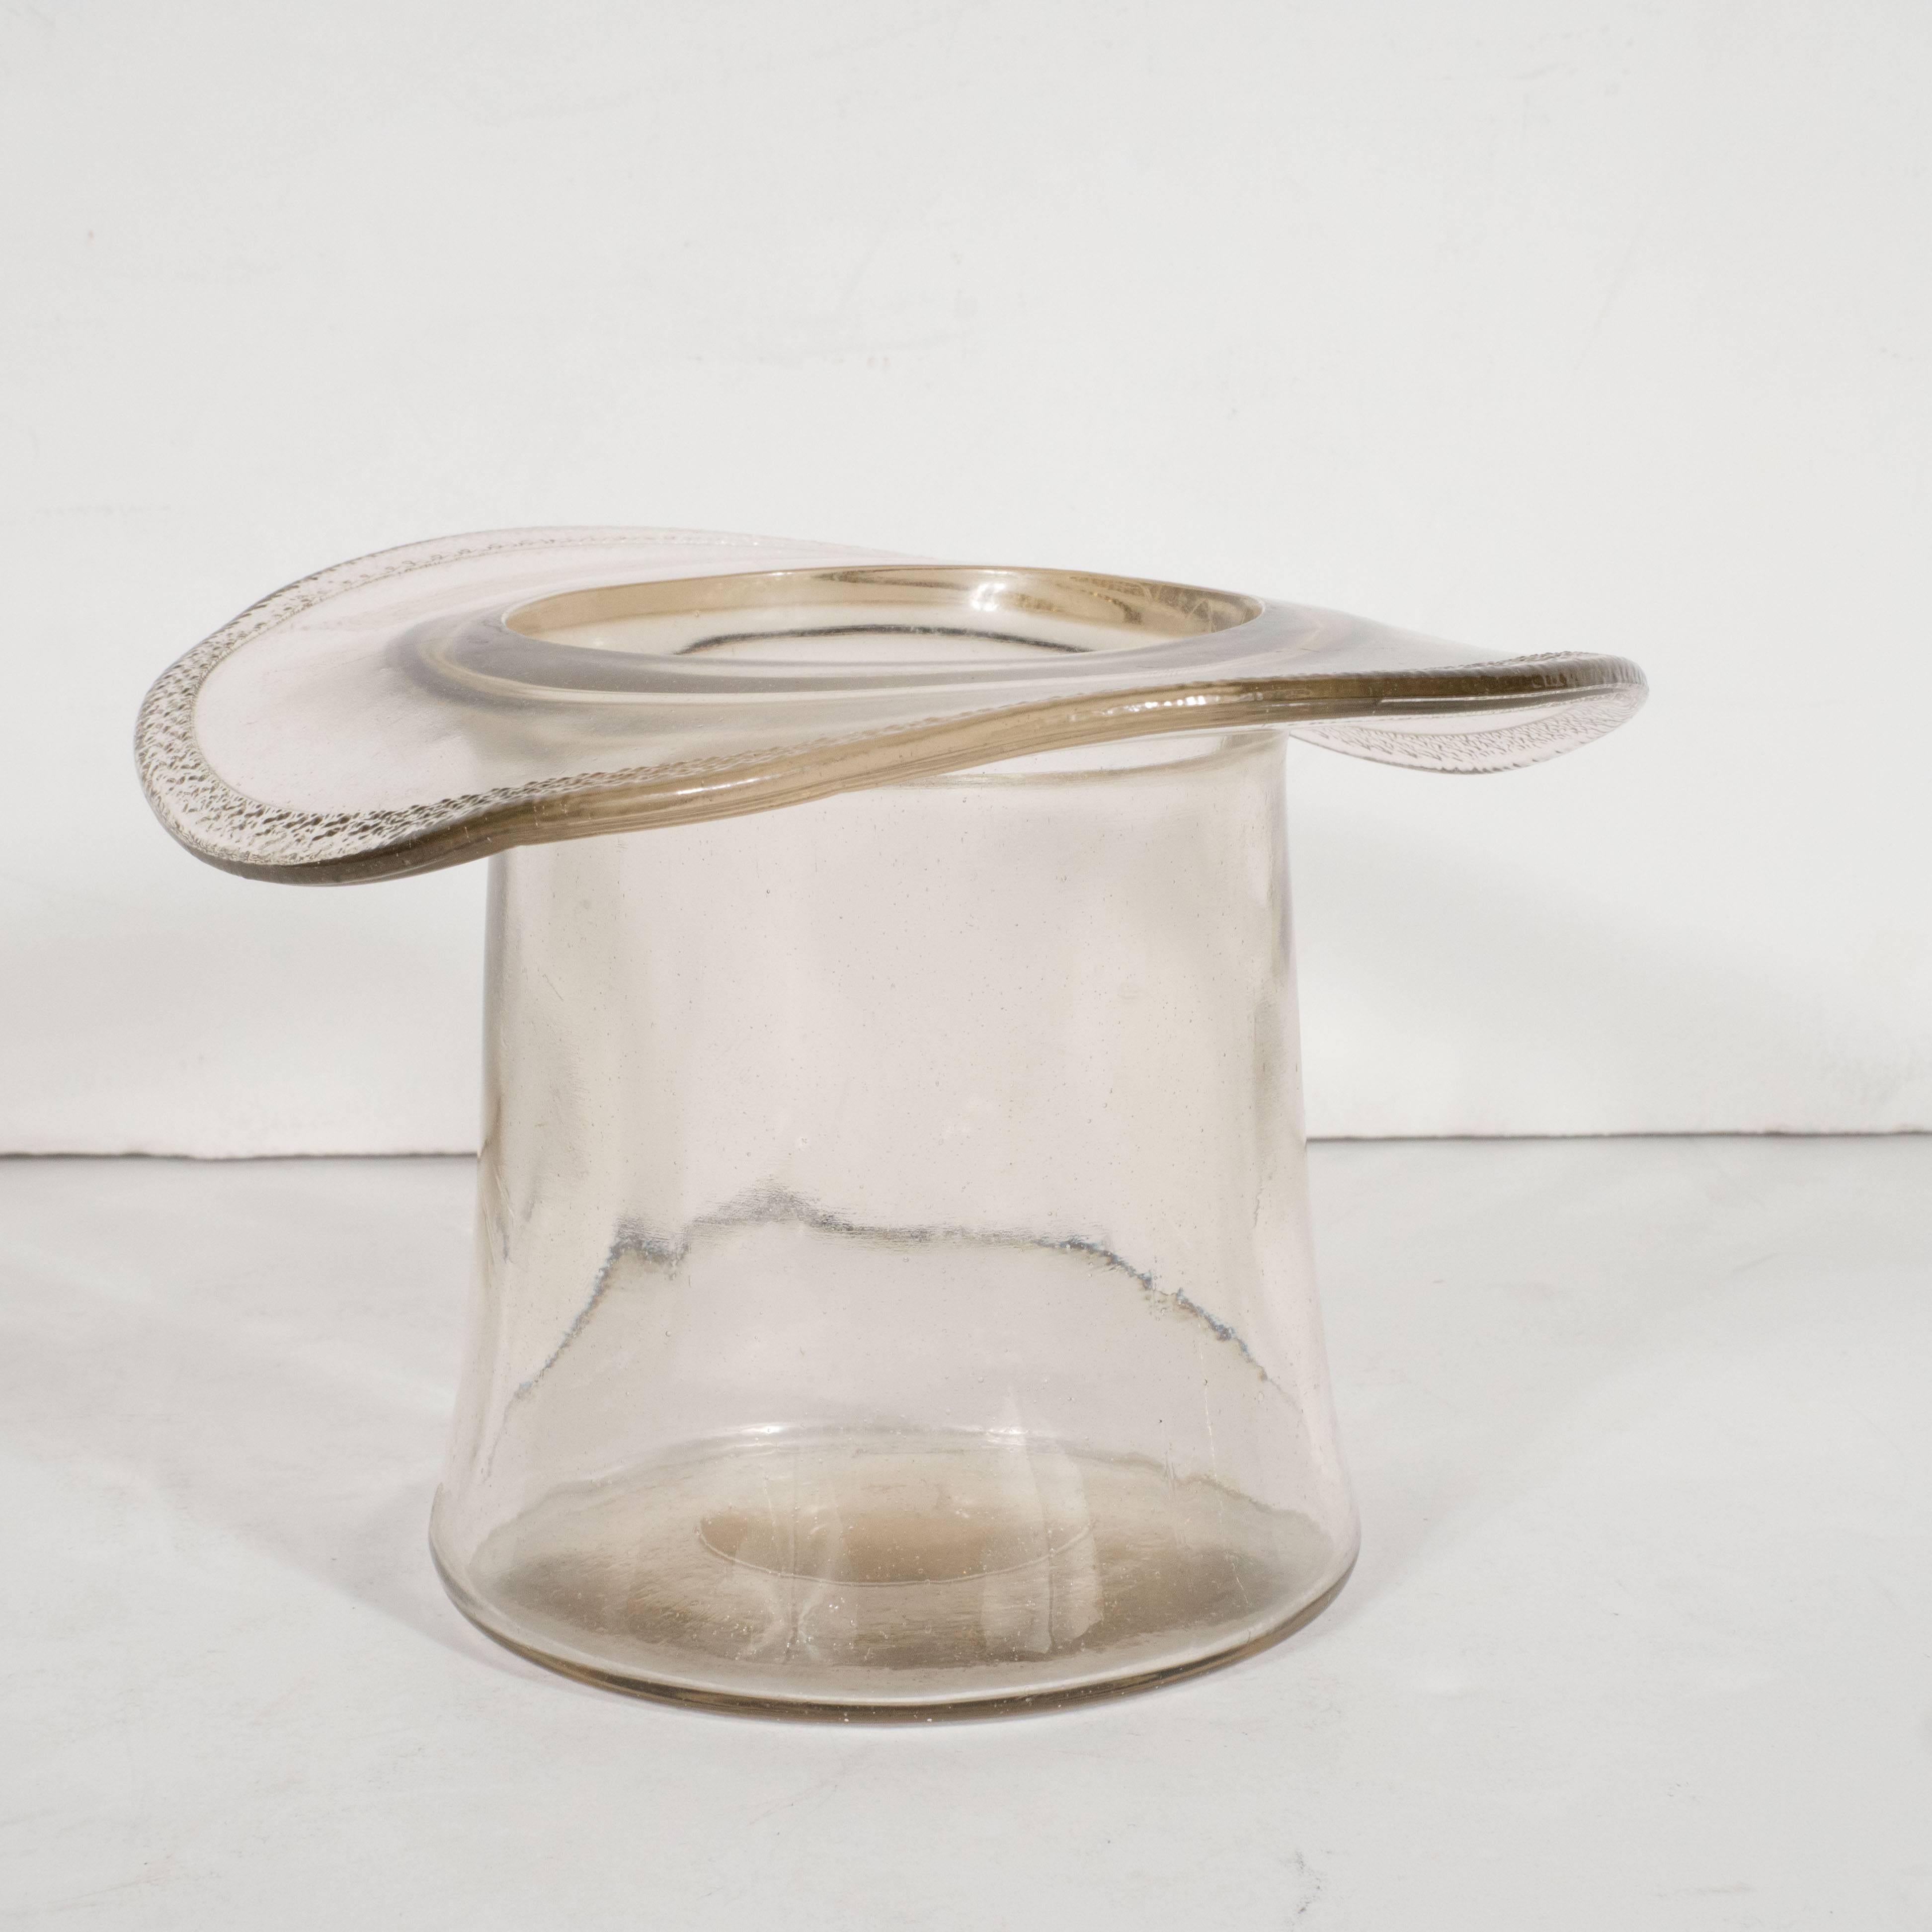 This 1940s Art Deco ice bucket, in the shape of a top hat, features elegant curves and a textured edge circumscribing the brim. This would be an ideal vessel to present a Fine bottle of wine for a black tie dinner party or to add an air of